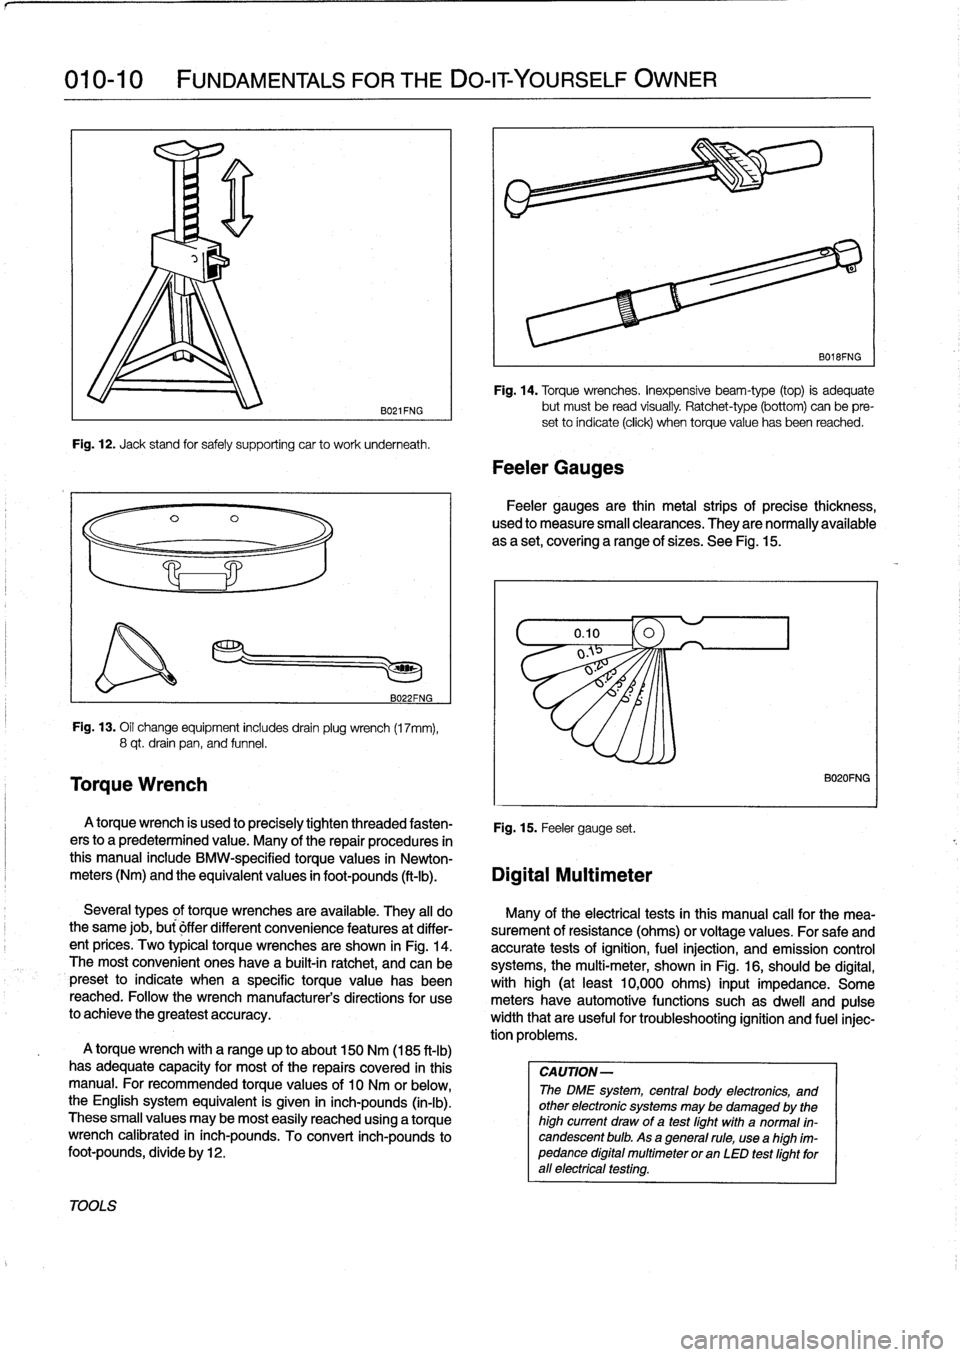 BMW 323i 1995 E36 Workshop Manual 
010-10

	

FUNDAMENTALS
FOR
THE
DO-IT
YOURSELF
OWNER

TOOLS

Torque
Wrench

B021FNG

Fig
.
12
.
Jack
stand
for
safely
supporting
car
to
work
underneath
.

B022FNG

Fig
.
13
.
Oil
change
equipment
inc